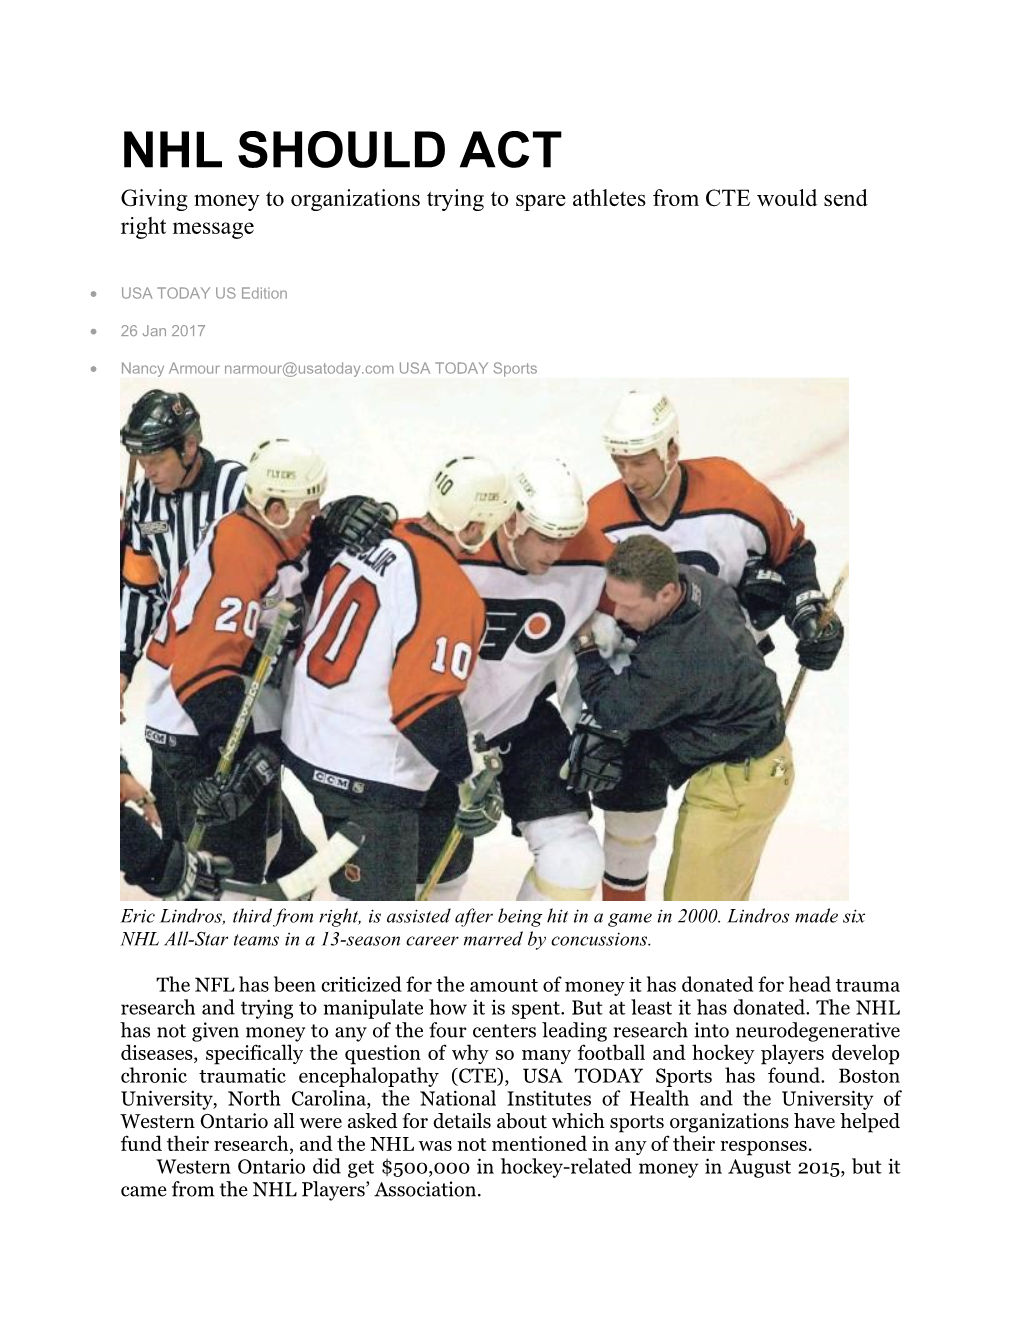 NHL Should Act on CTE Research